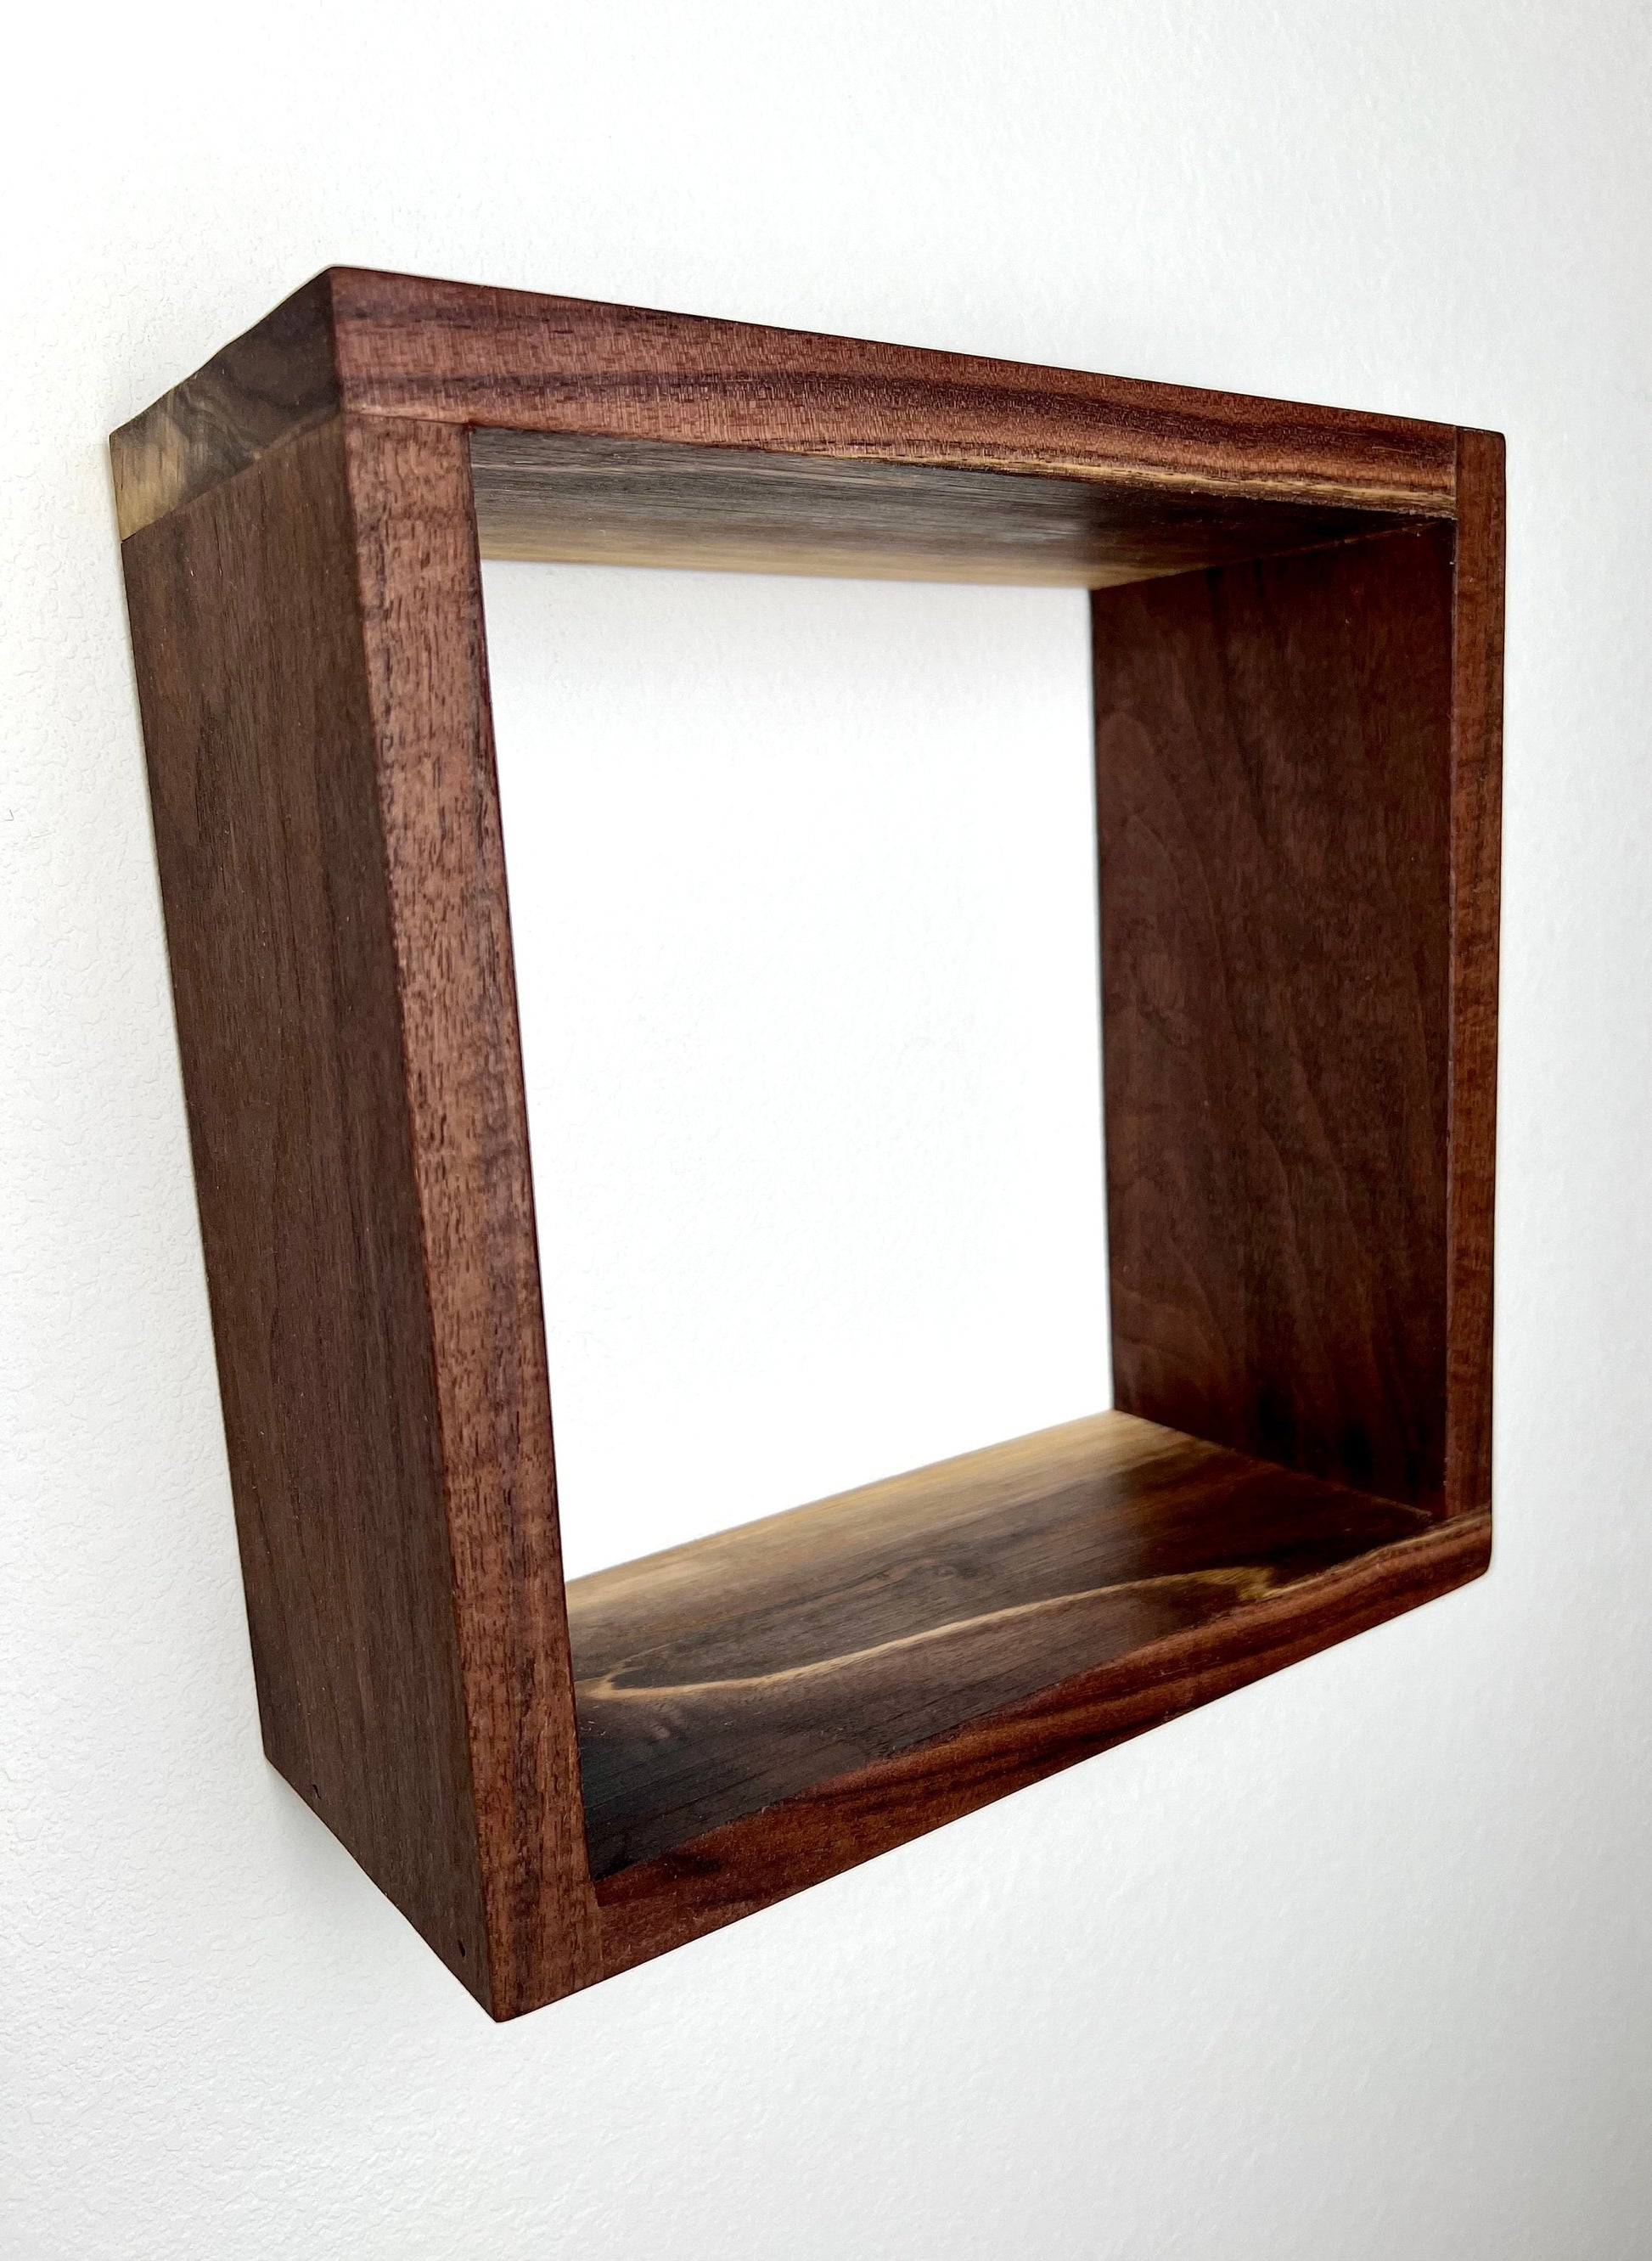 Hardwood cube pictured in Walnut